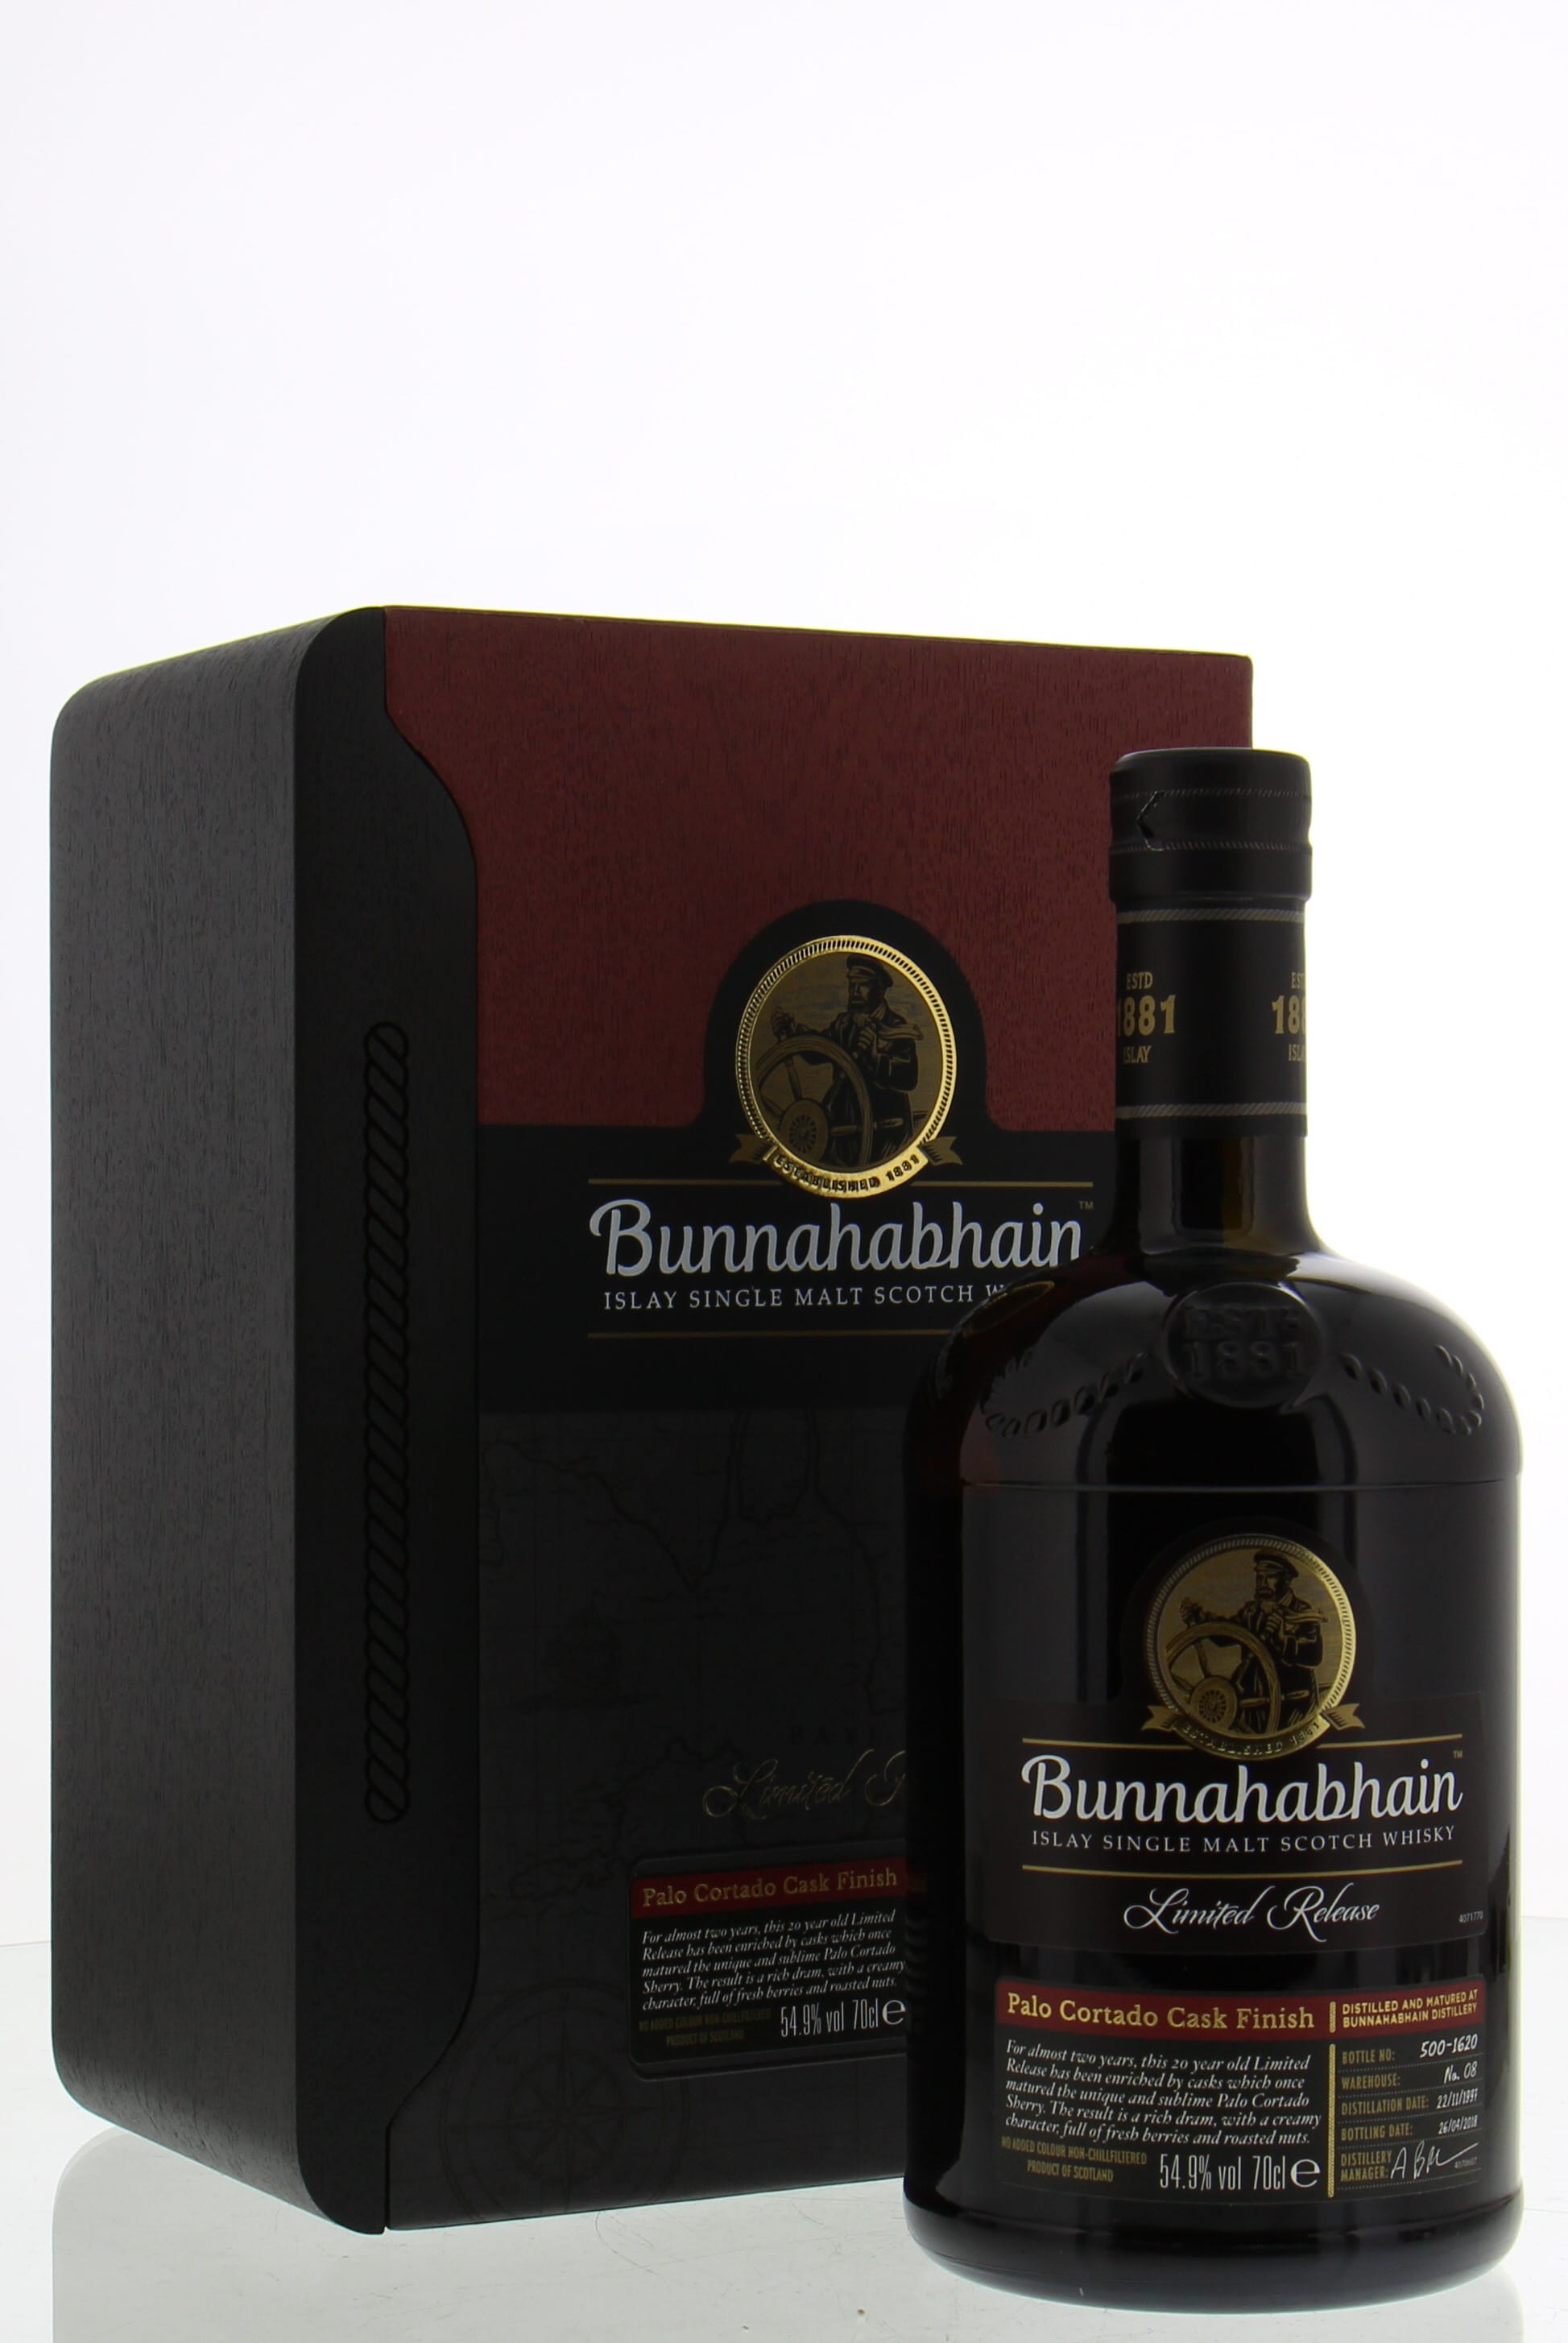 Bunnahabhain - 20 Years Old Palo Cortado Sherry Casks Finish 54.9% 1997 In Original Container